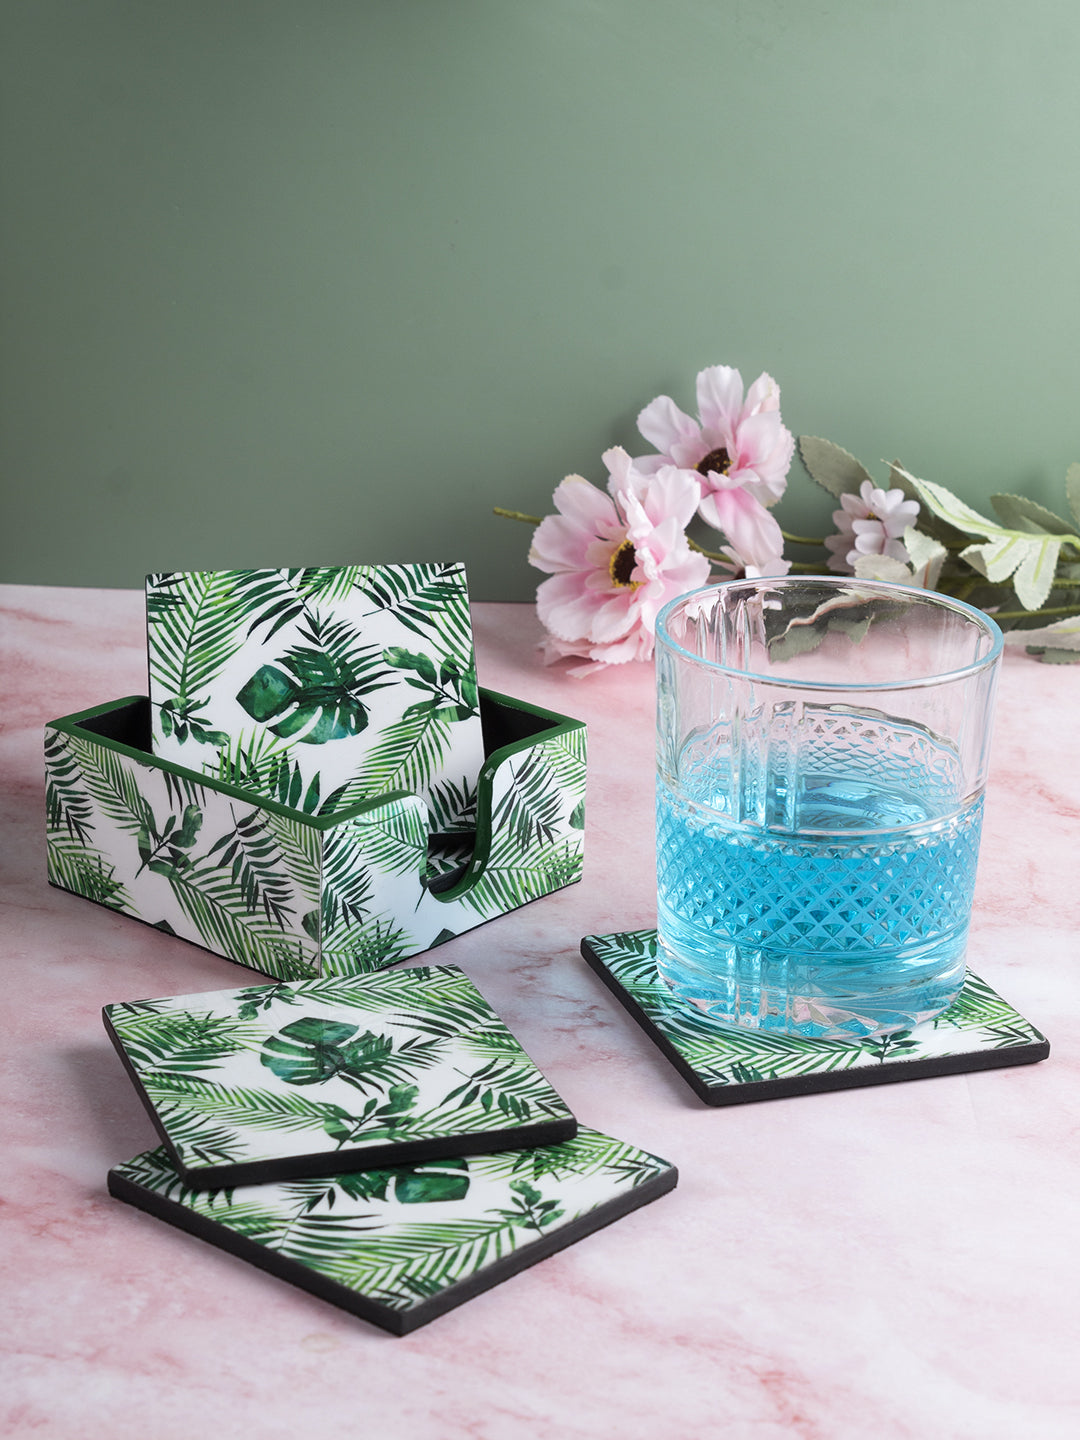 VON CASA Coaster with Holder, Nature Inspired Print, Tea Coaster, with Soft Bottom for Home, Office, & Restaurant, Green Colour, MDF, Set of 6